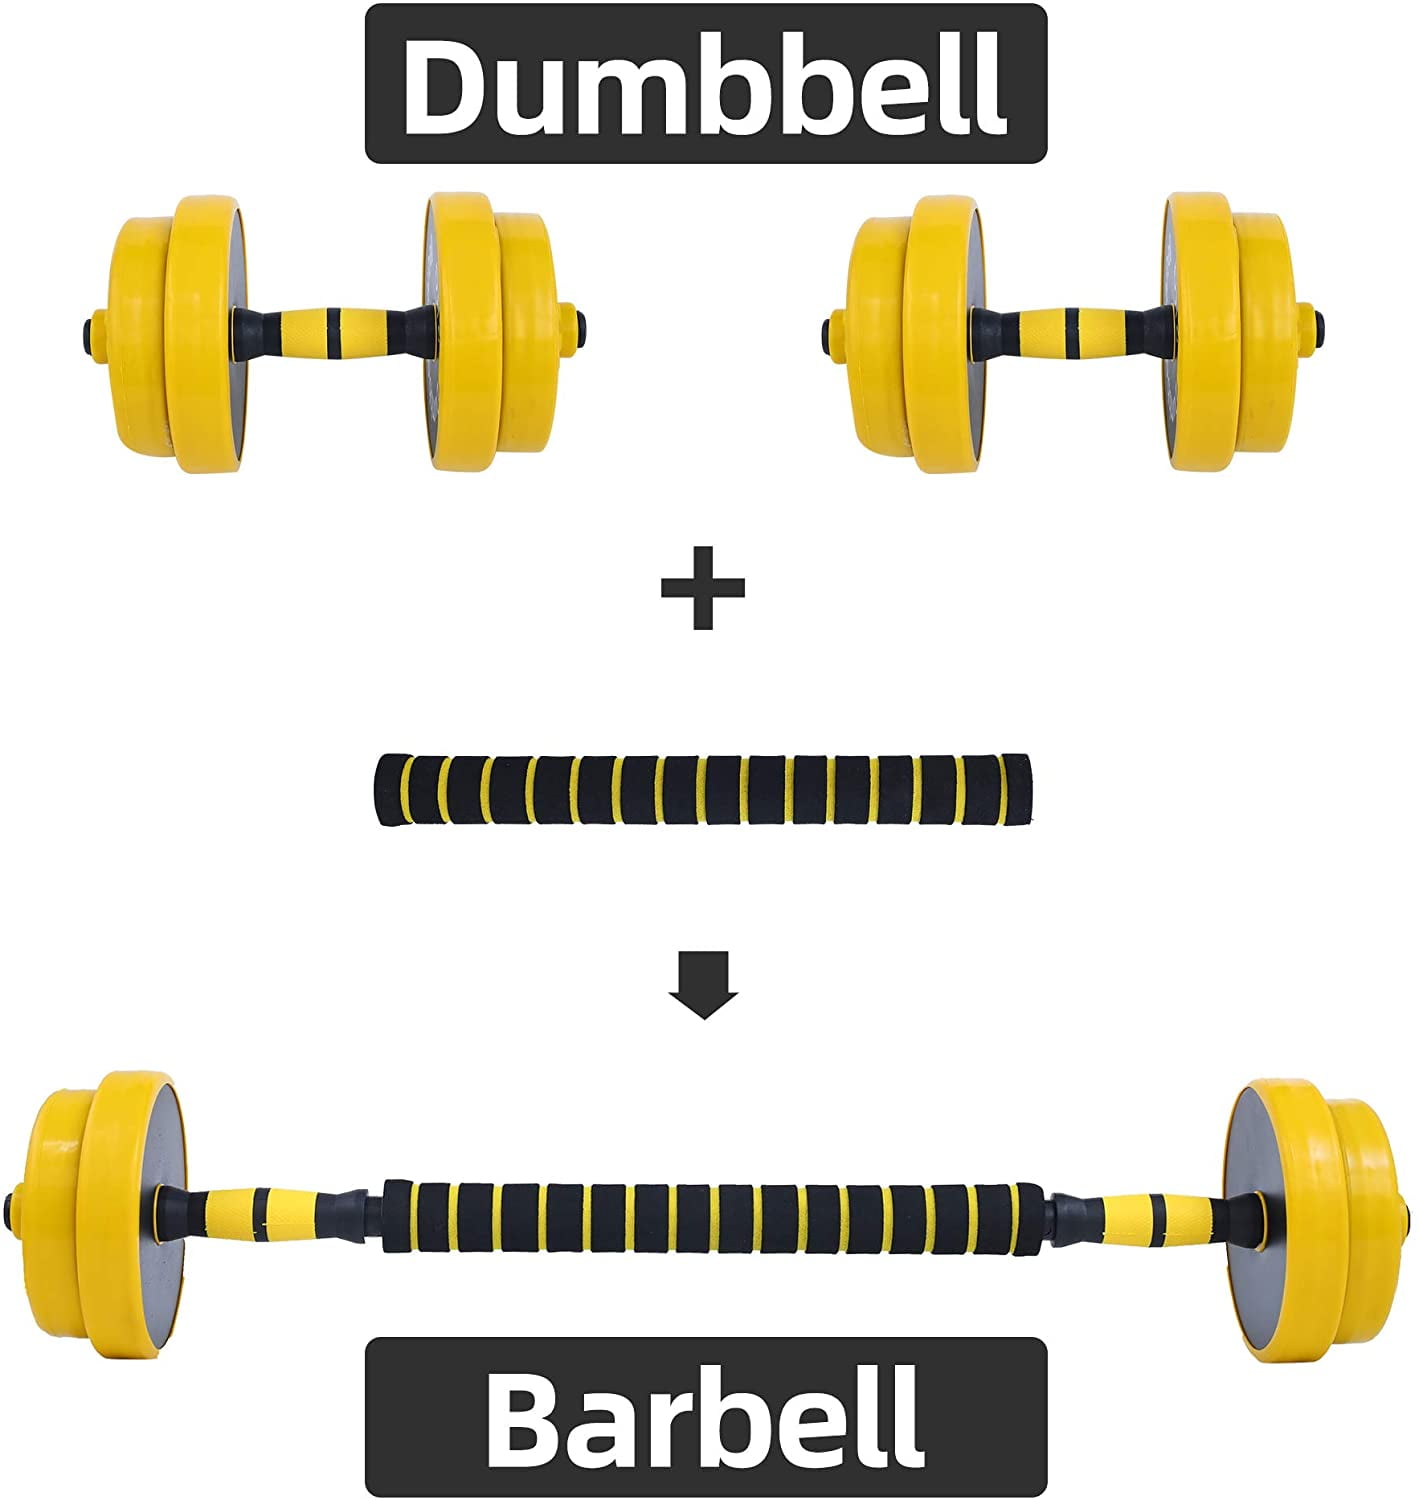 Easy Assembly and Save Space Workout Strength Training Fitness Weight Home Gym. Neoprene Anti-Slip Handle Funcode Adjustable Dumbbell Barbell 2 in 1